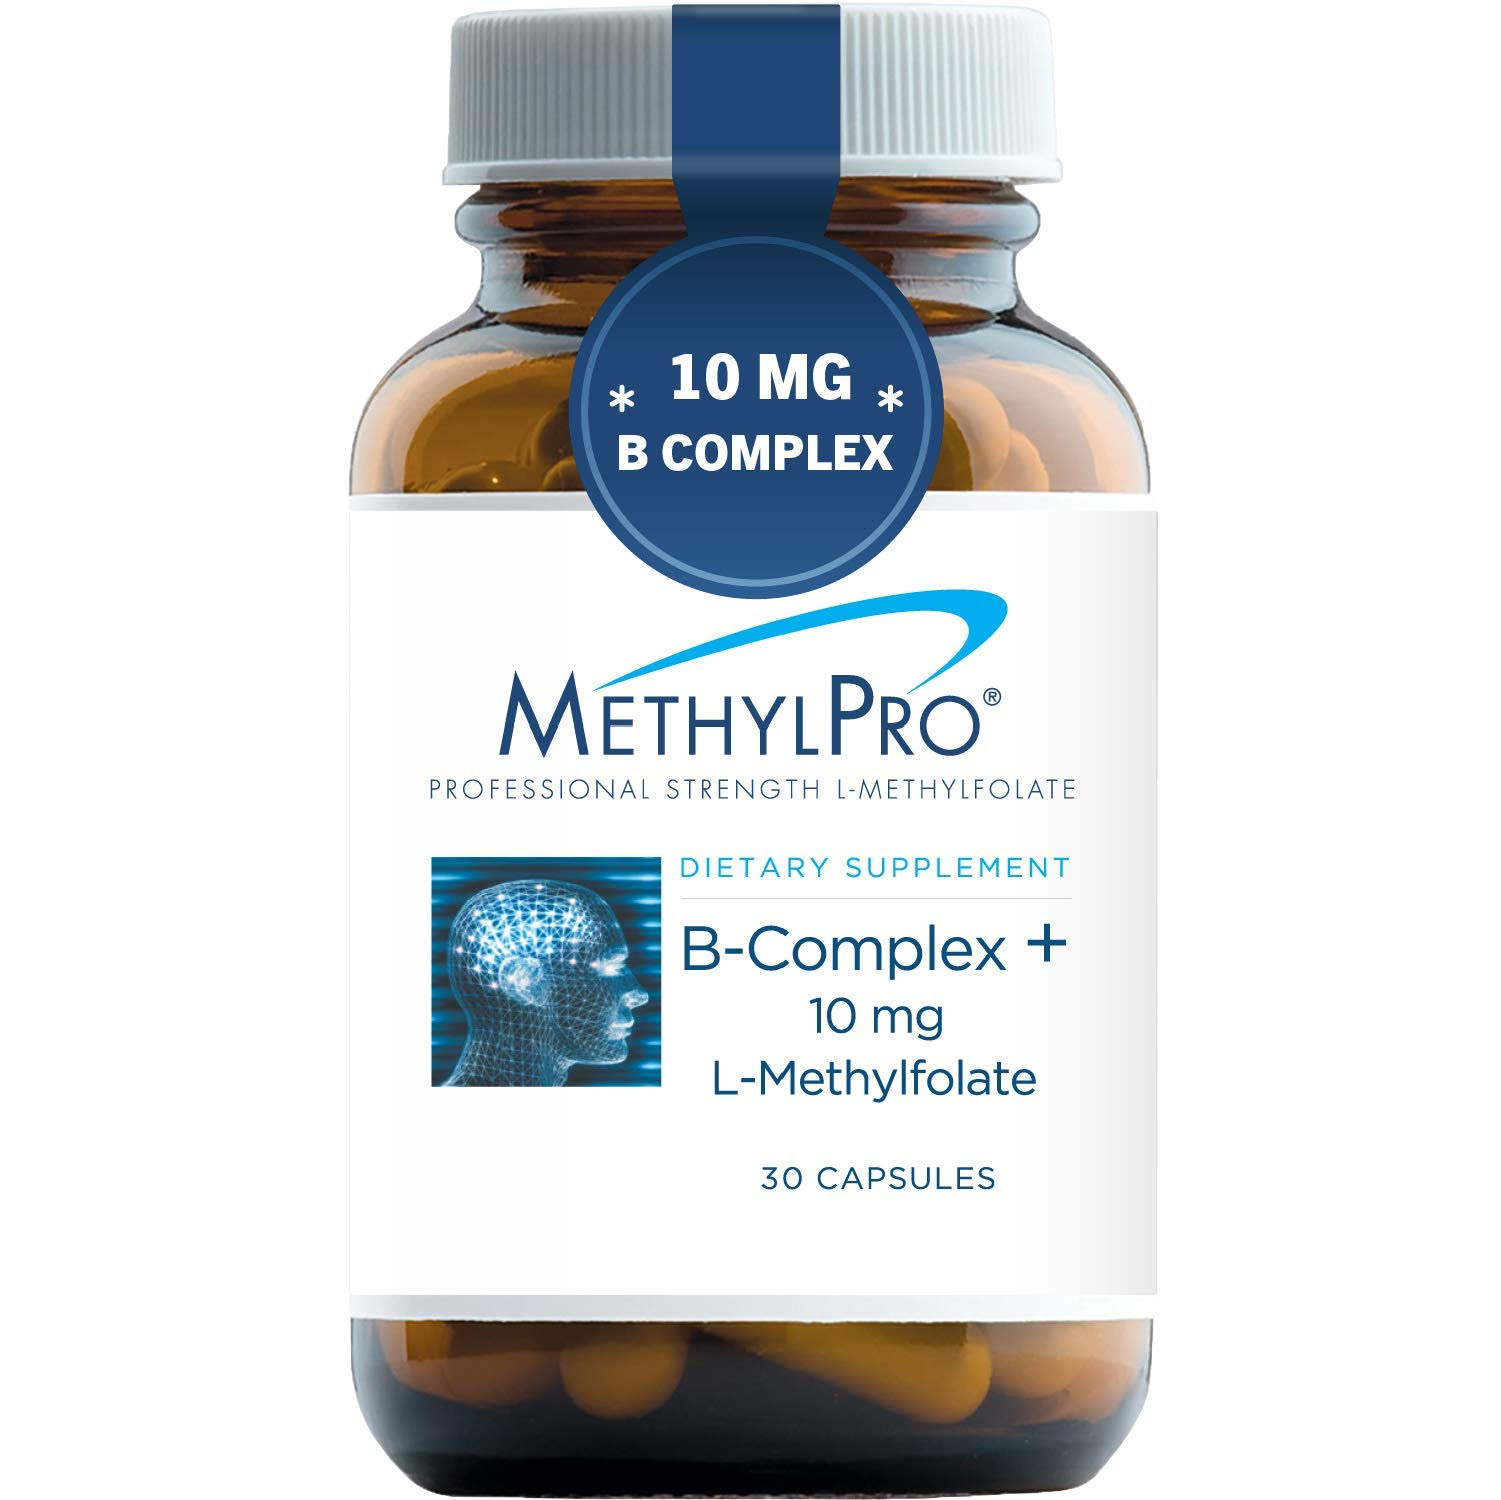 Methylpro B-Complex + L-Methylfolate - 10mg, 30 Capsules